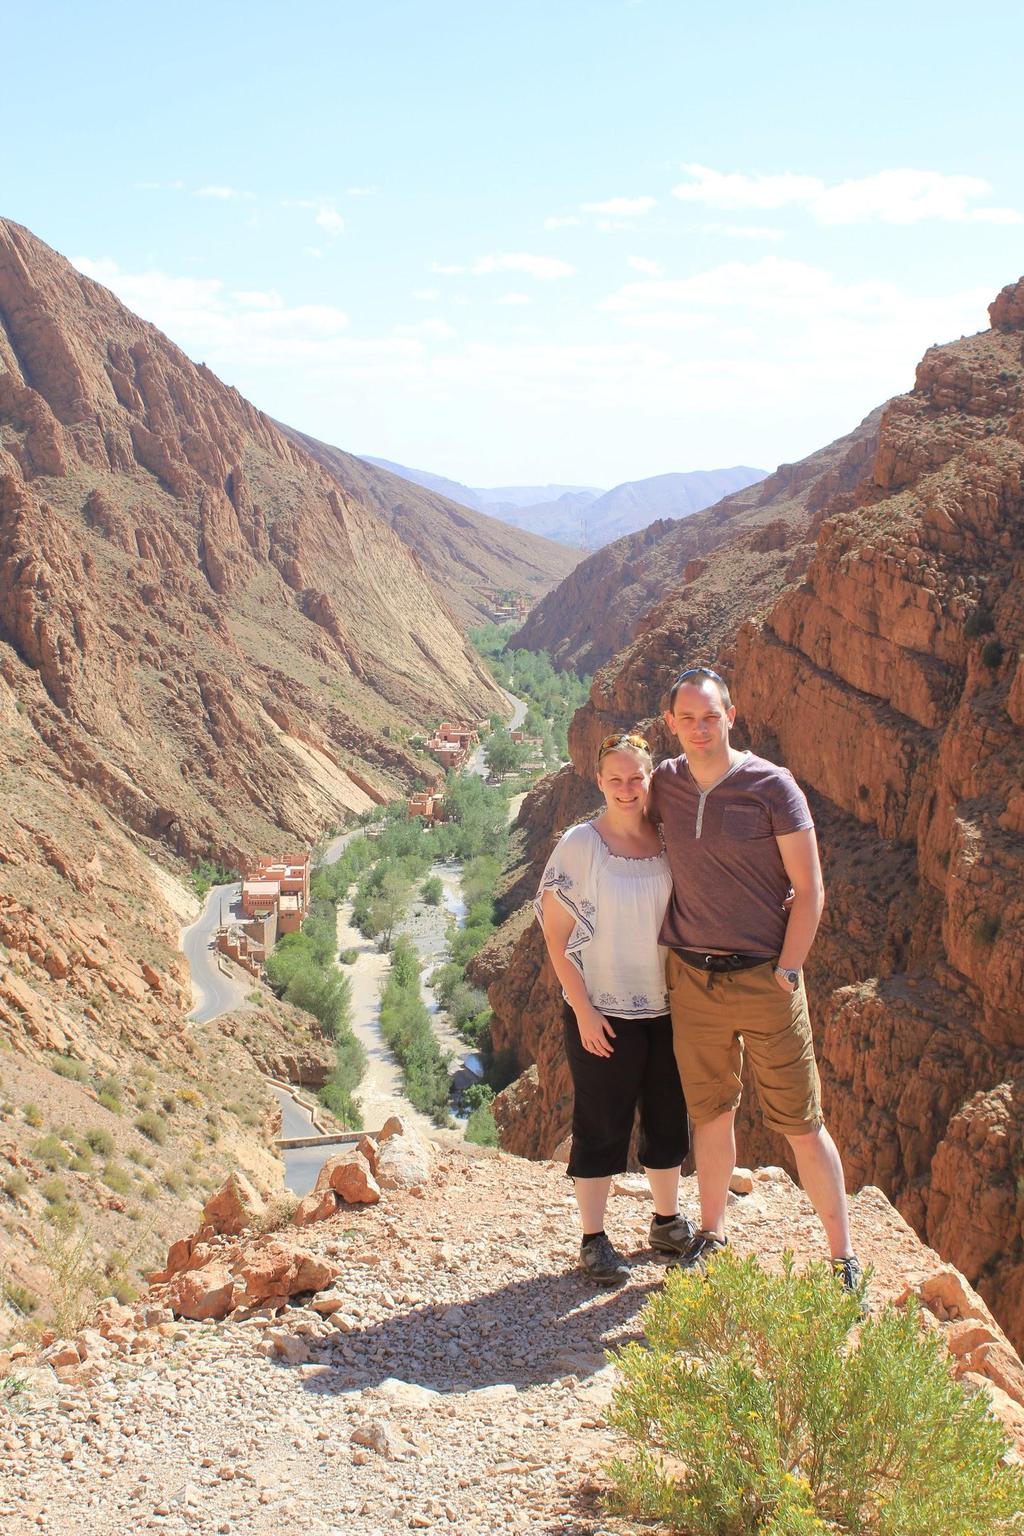 Who are we? We are Heather and Peter, a UK couple who fit our day jobs around frequent luxury adventure travel.